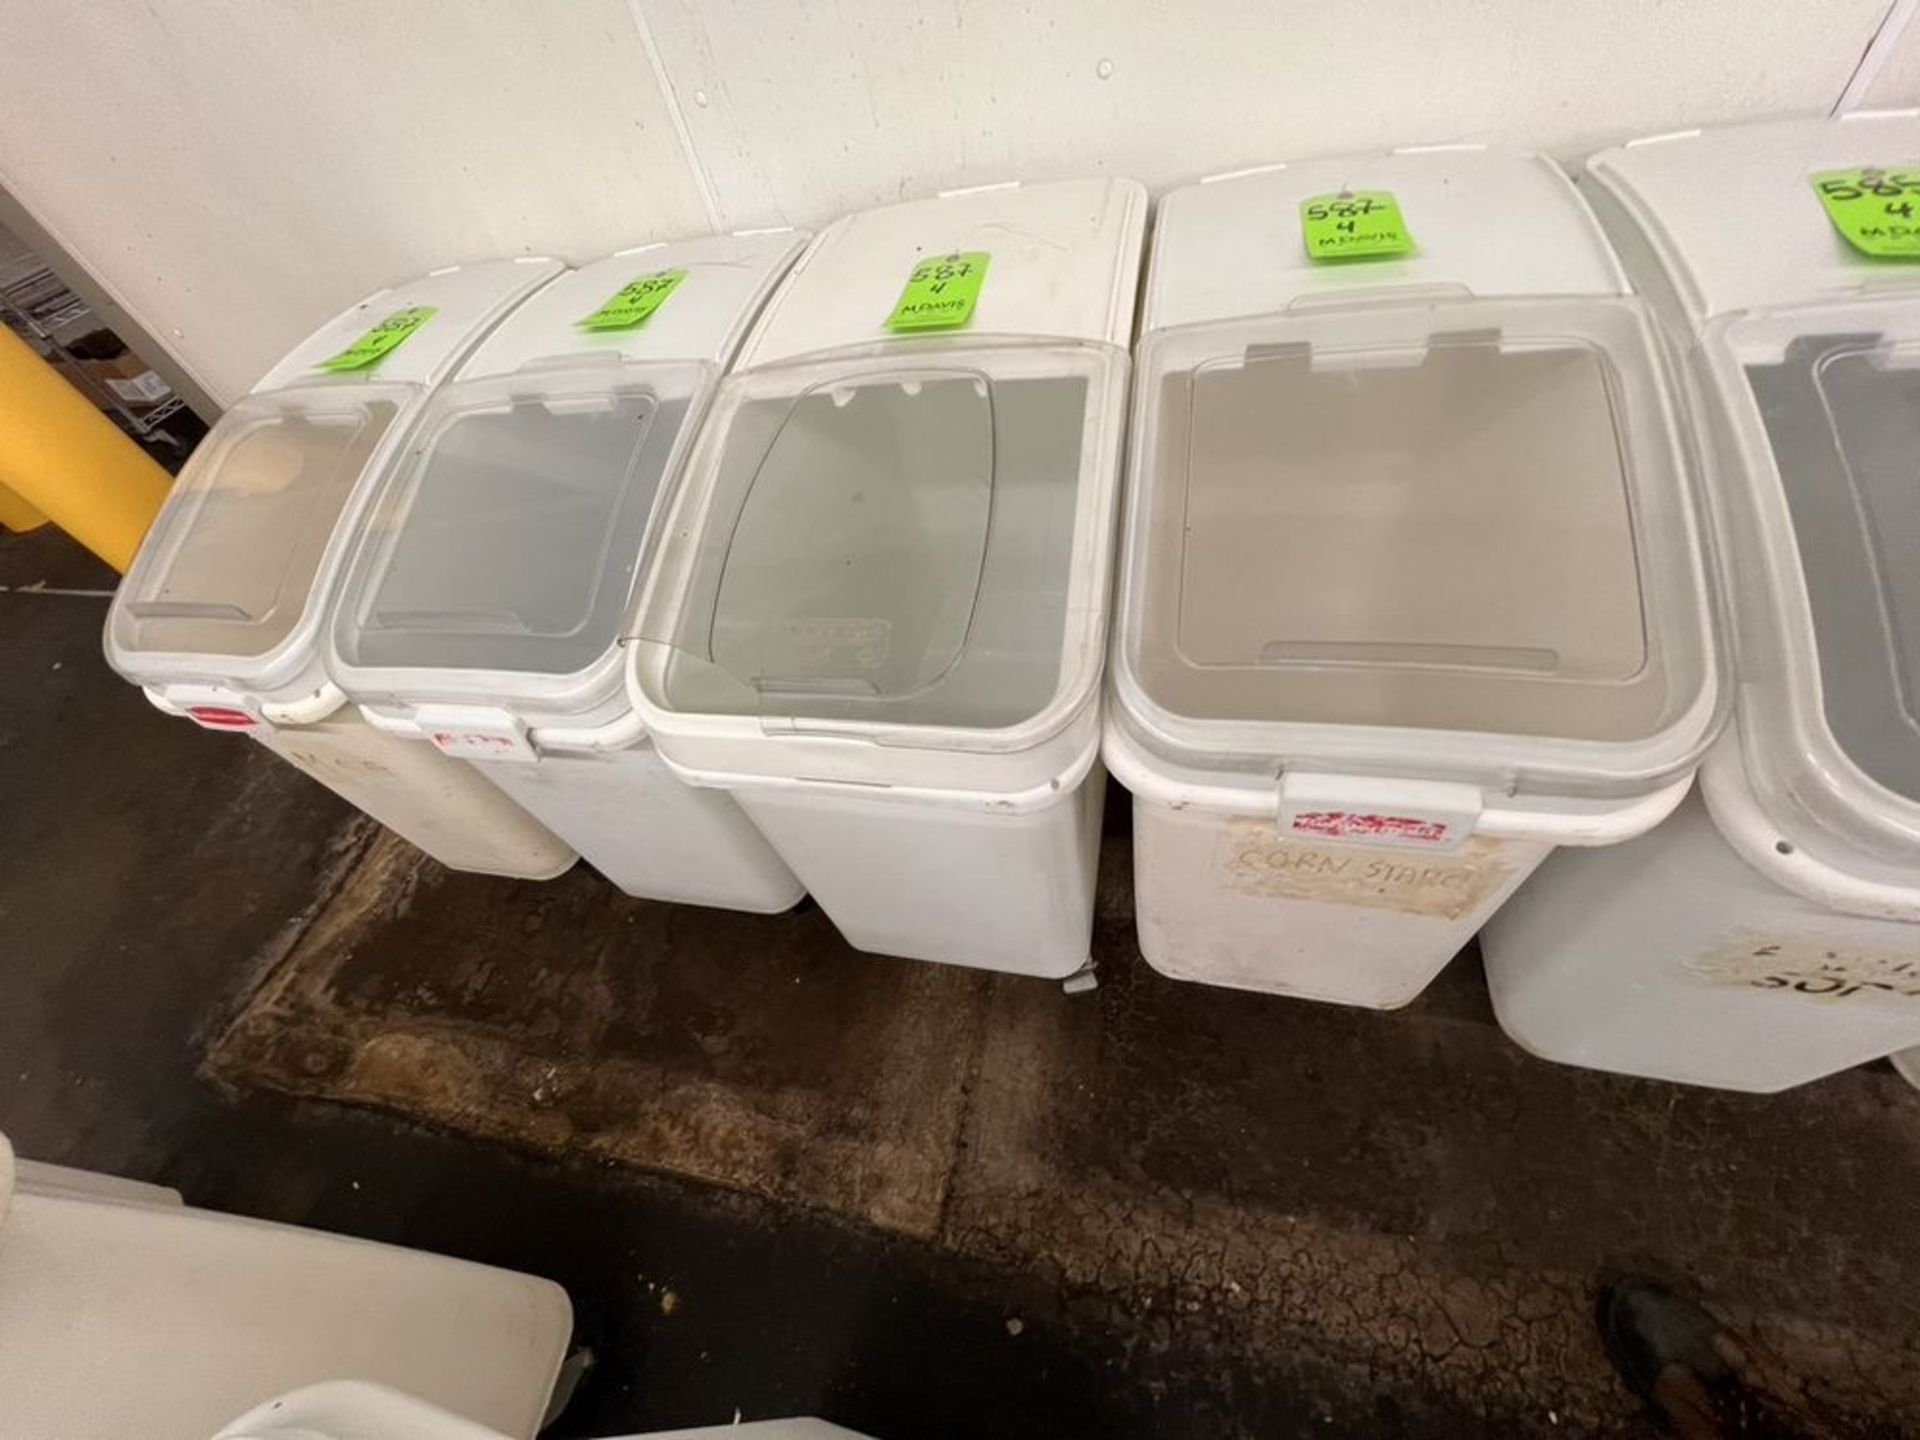 (4) INGREDIENT BINS BY RUBBERMAID AND BAKER'S MARK